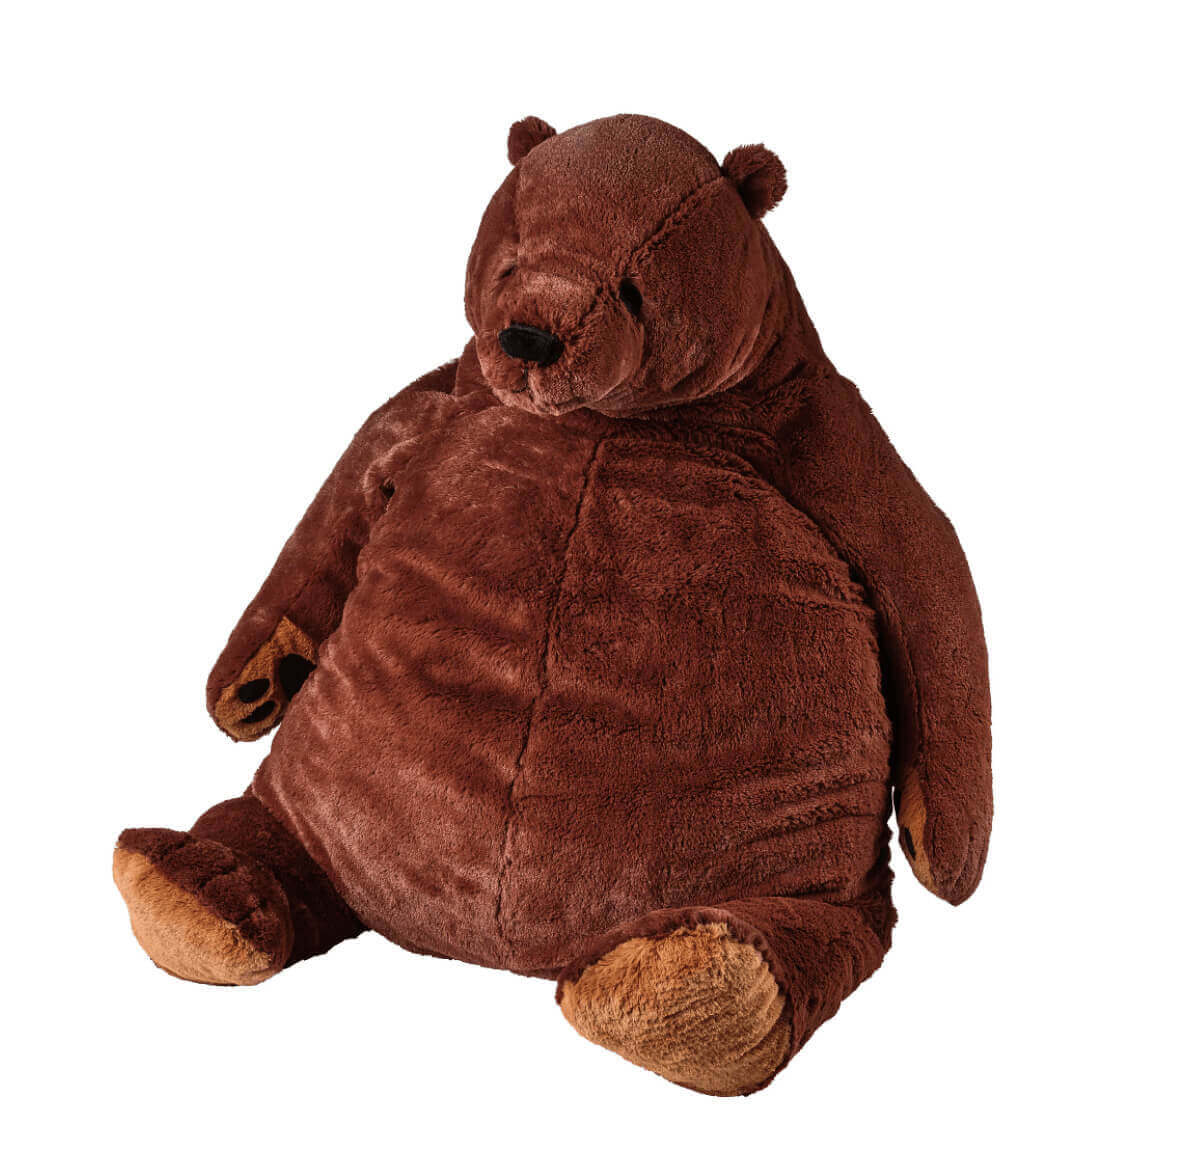 You are currently viewing How to buy the Djungelskog Bear Ikea Soft Toy